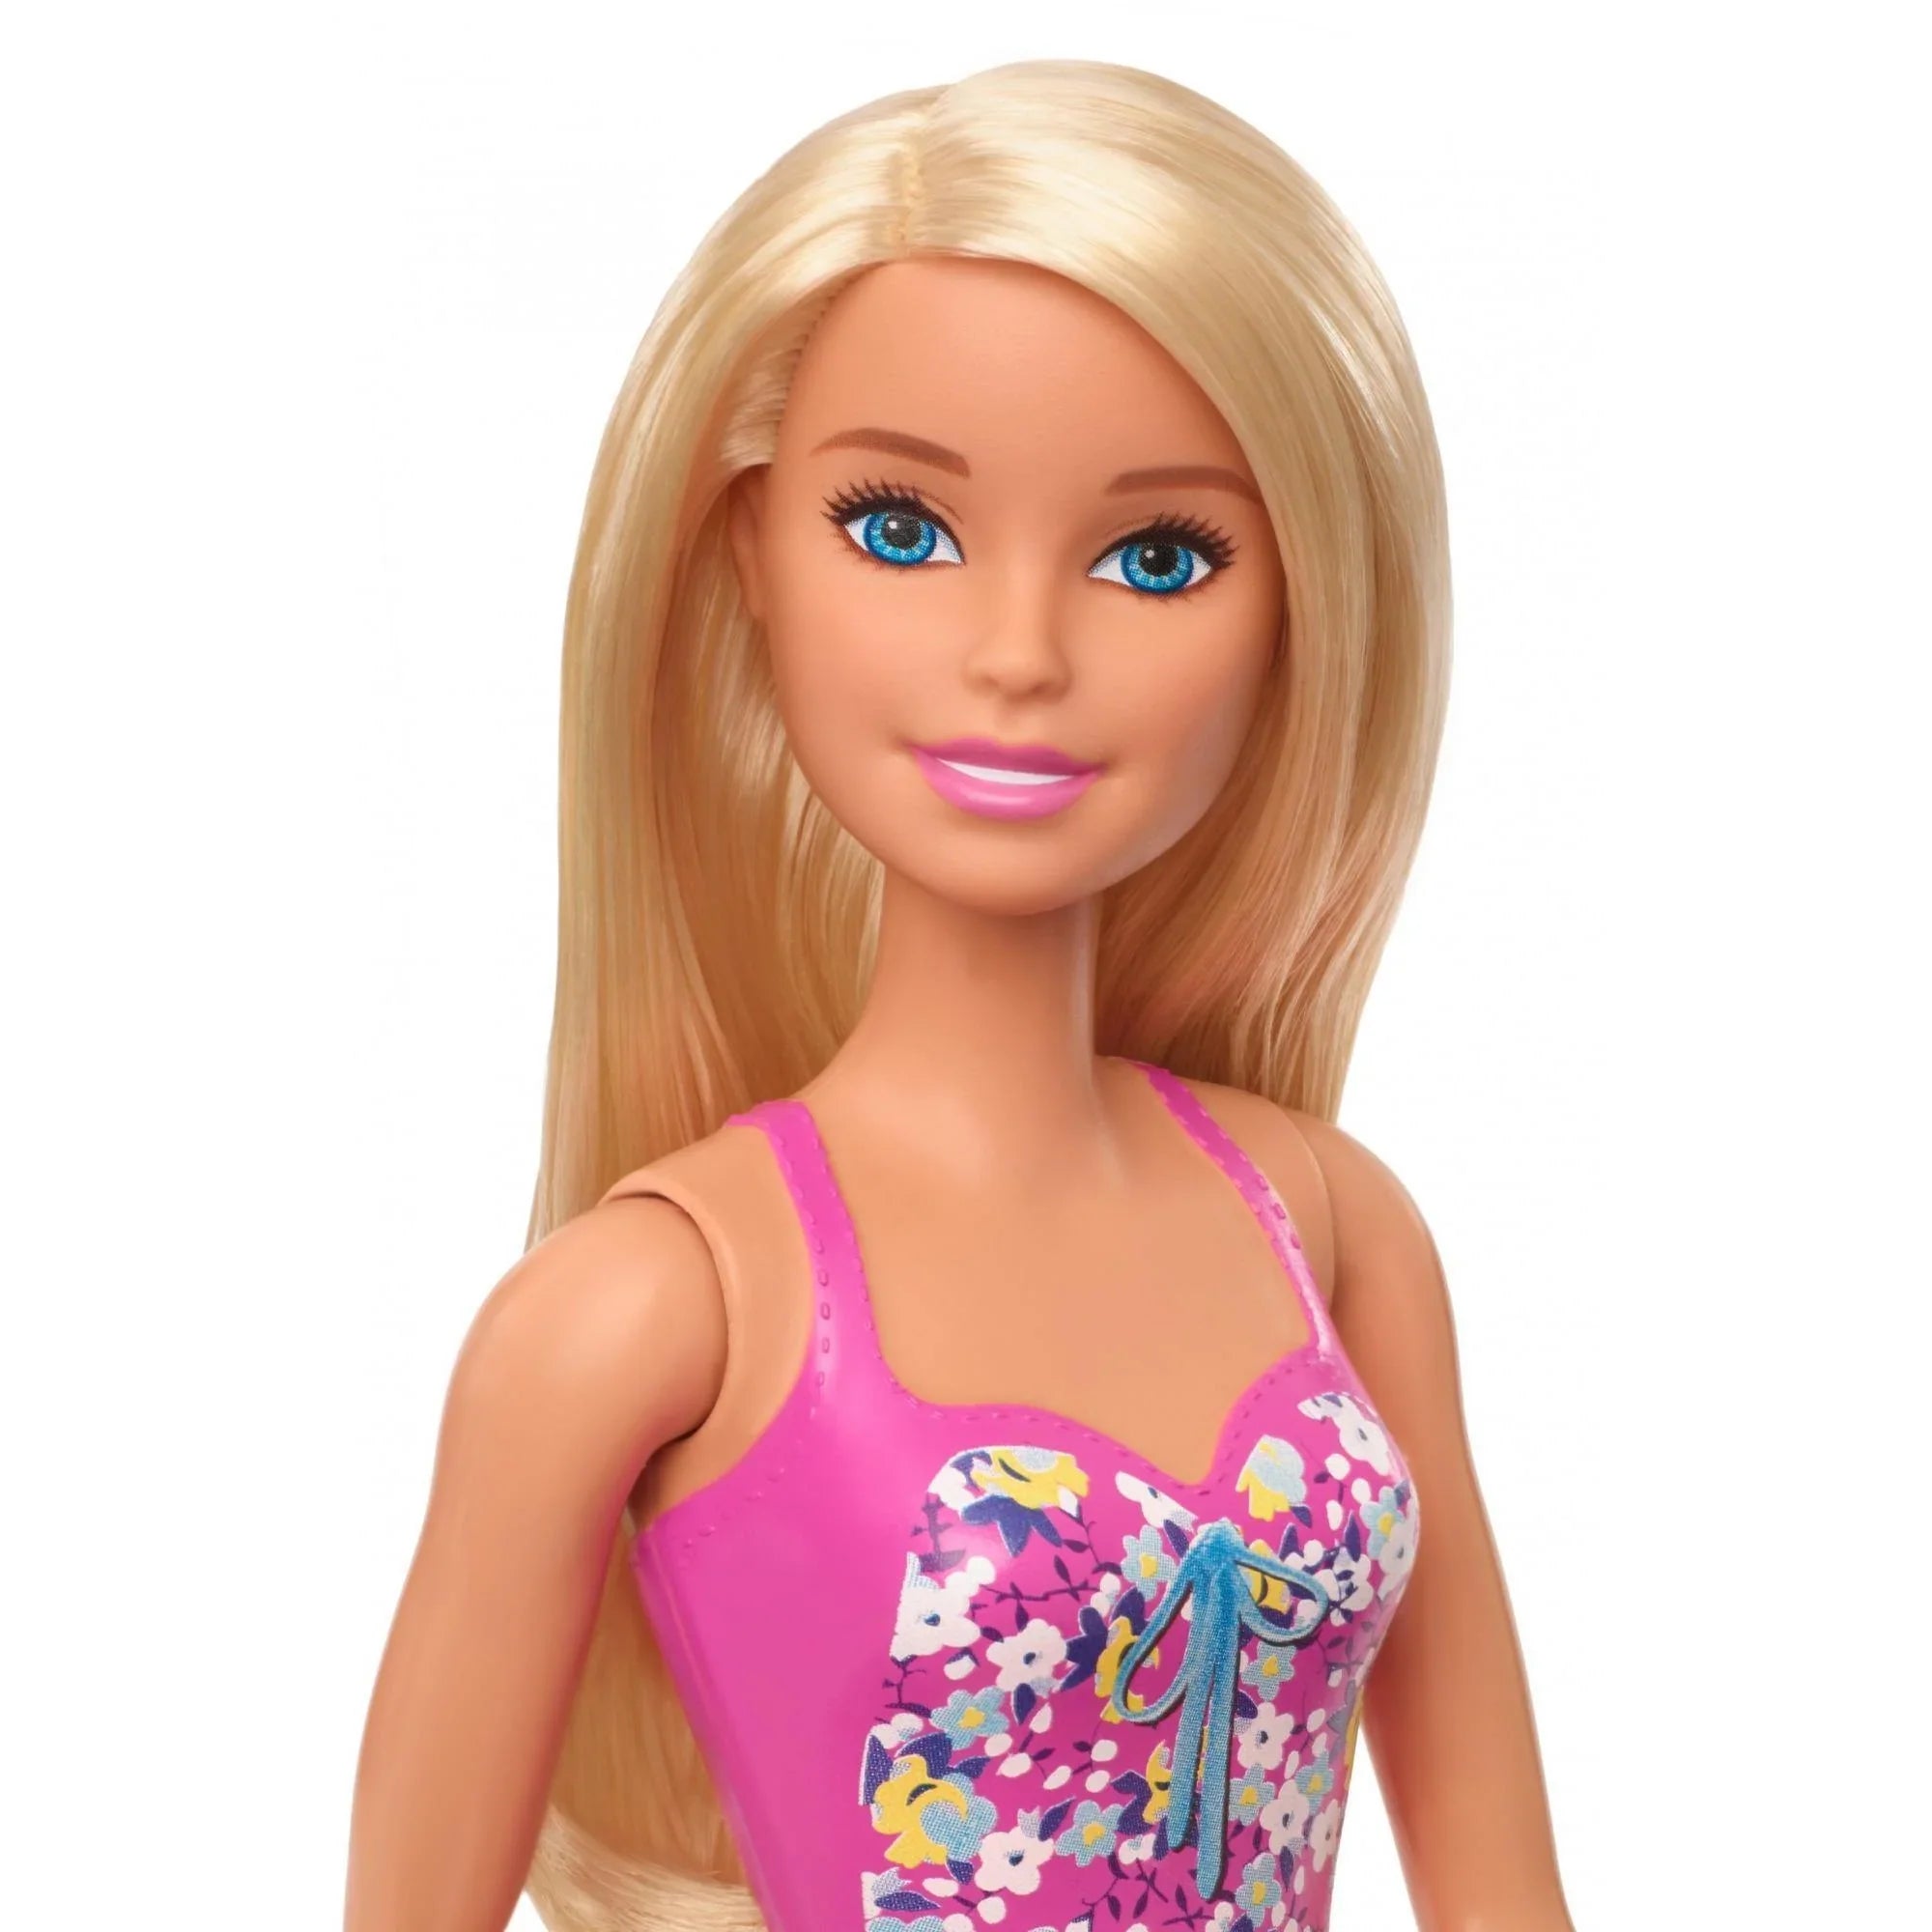 Blonde Barbie Doll Wearing Floral Swimsuit